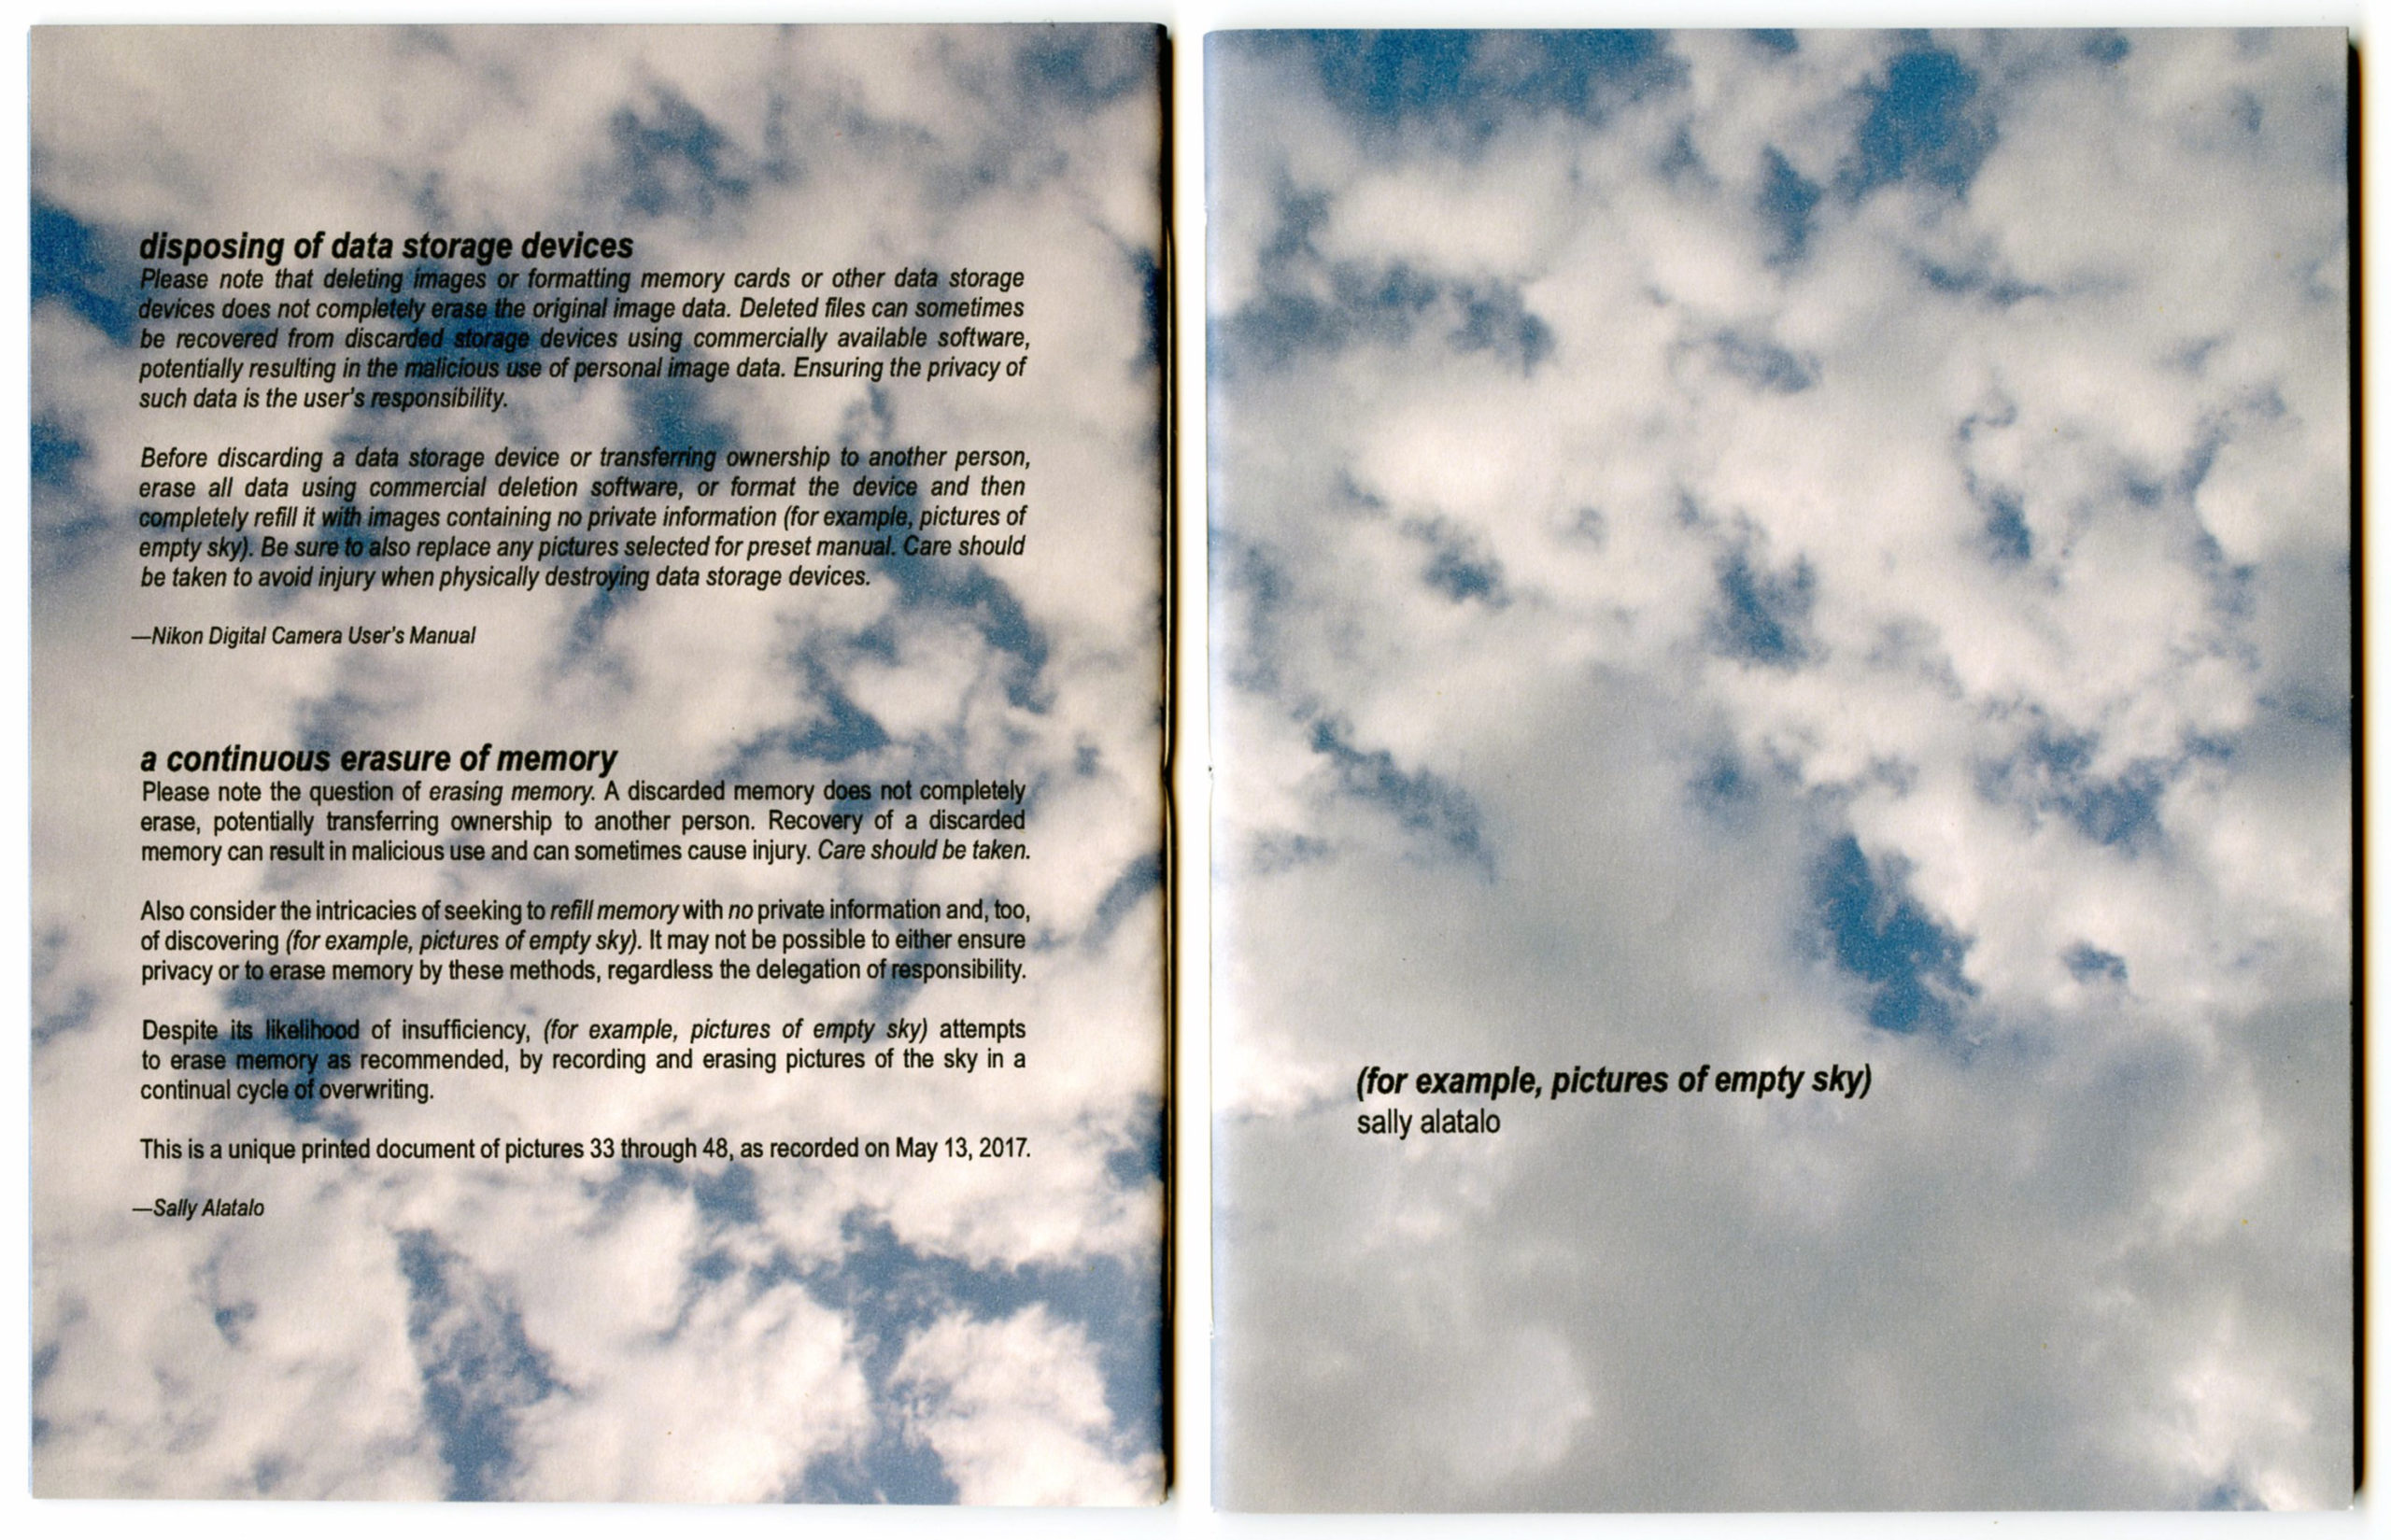 book front and back cover with images of clouds and text that reads (for example, pictures of empty sky)